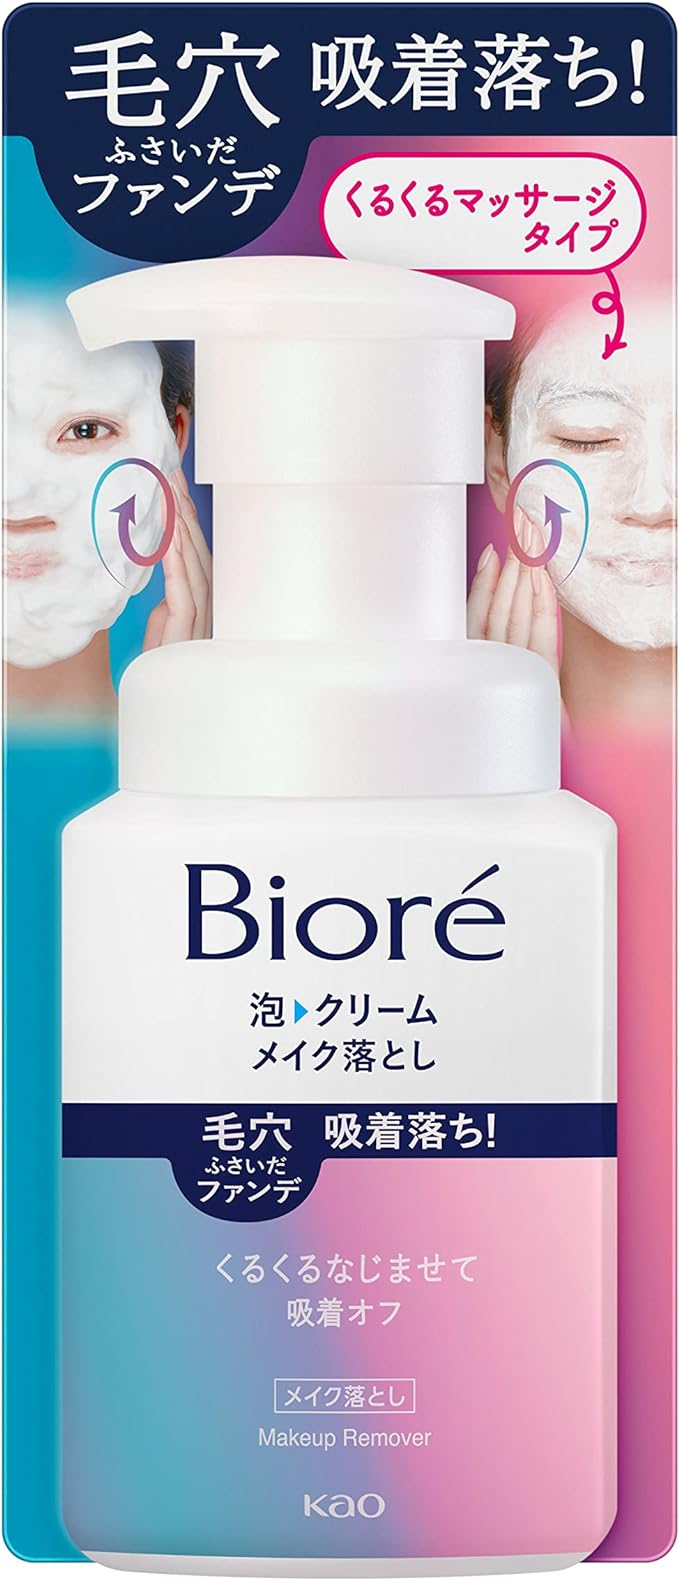 Biore Foam Cream Makeup Remover, 7.4 fl oz (210 ml), Removes Pore Base and Fonde, Oil-Free, W Face Wash Not Required, Cleansing - NewNest Australia